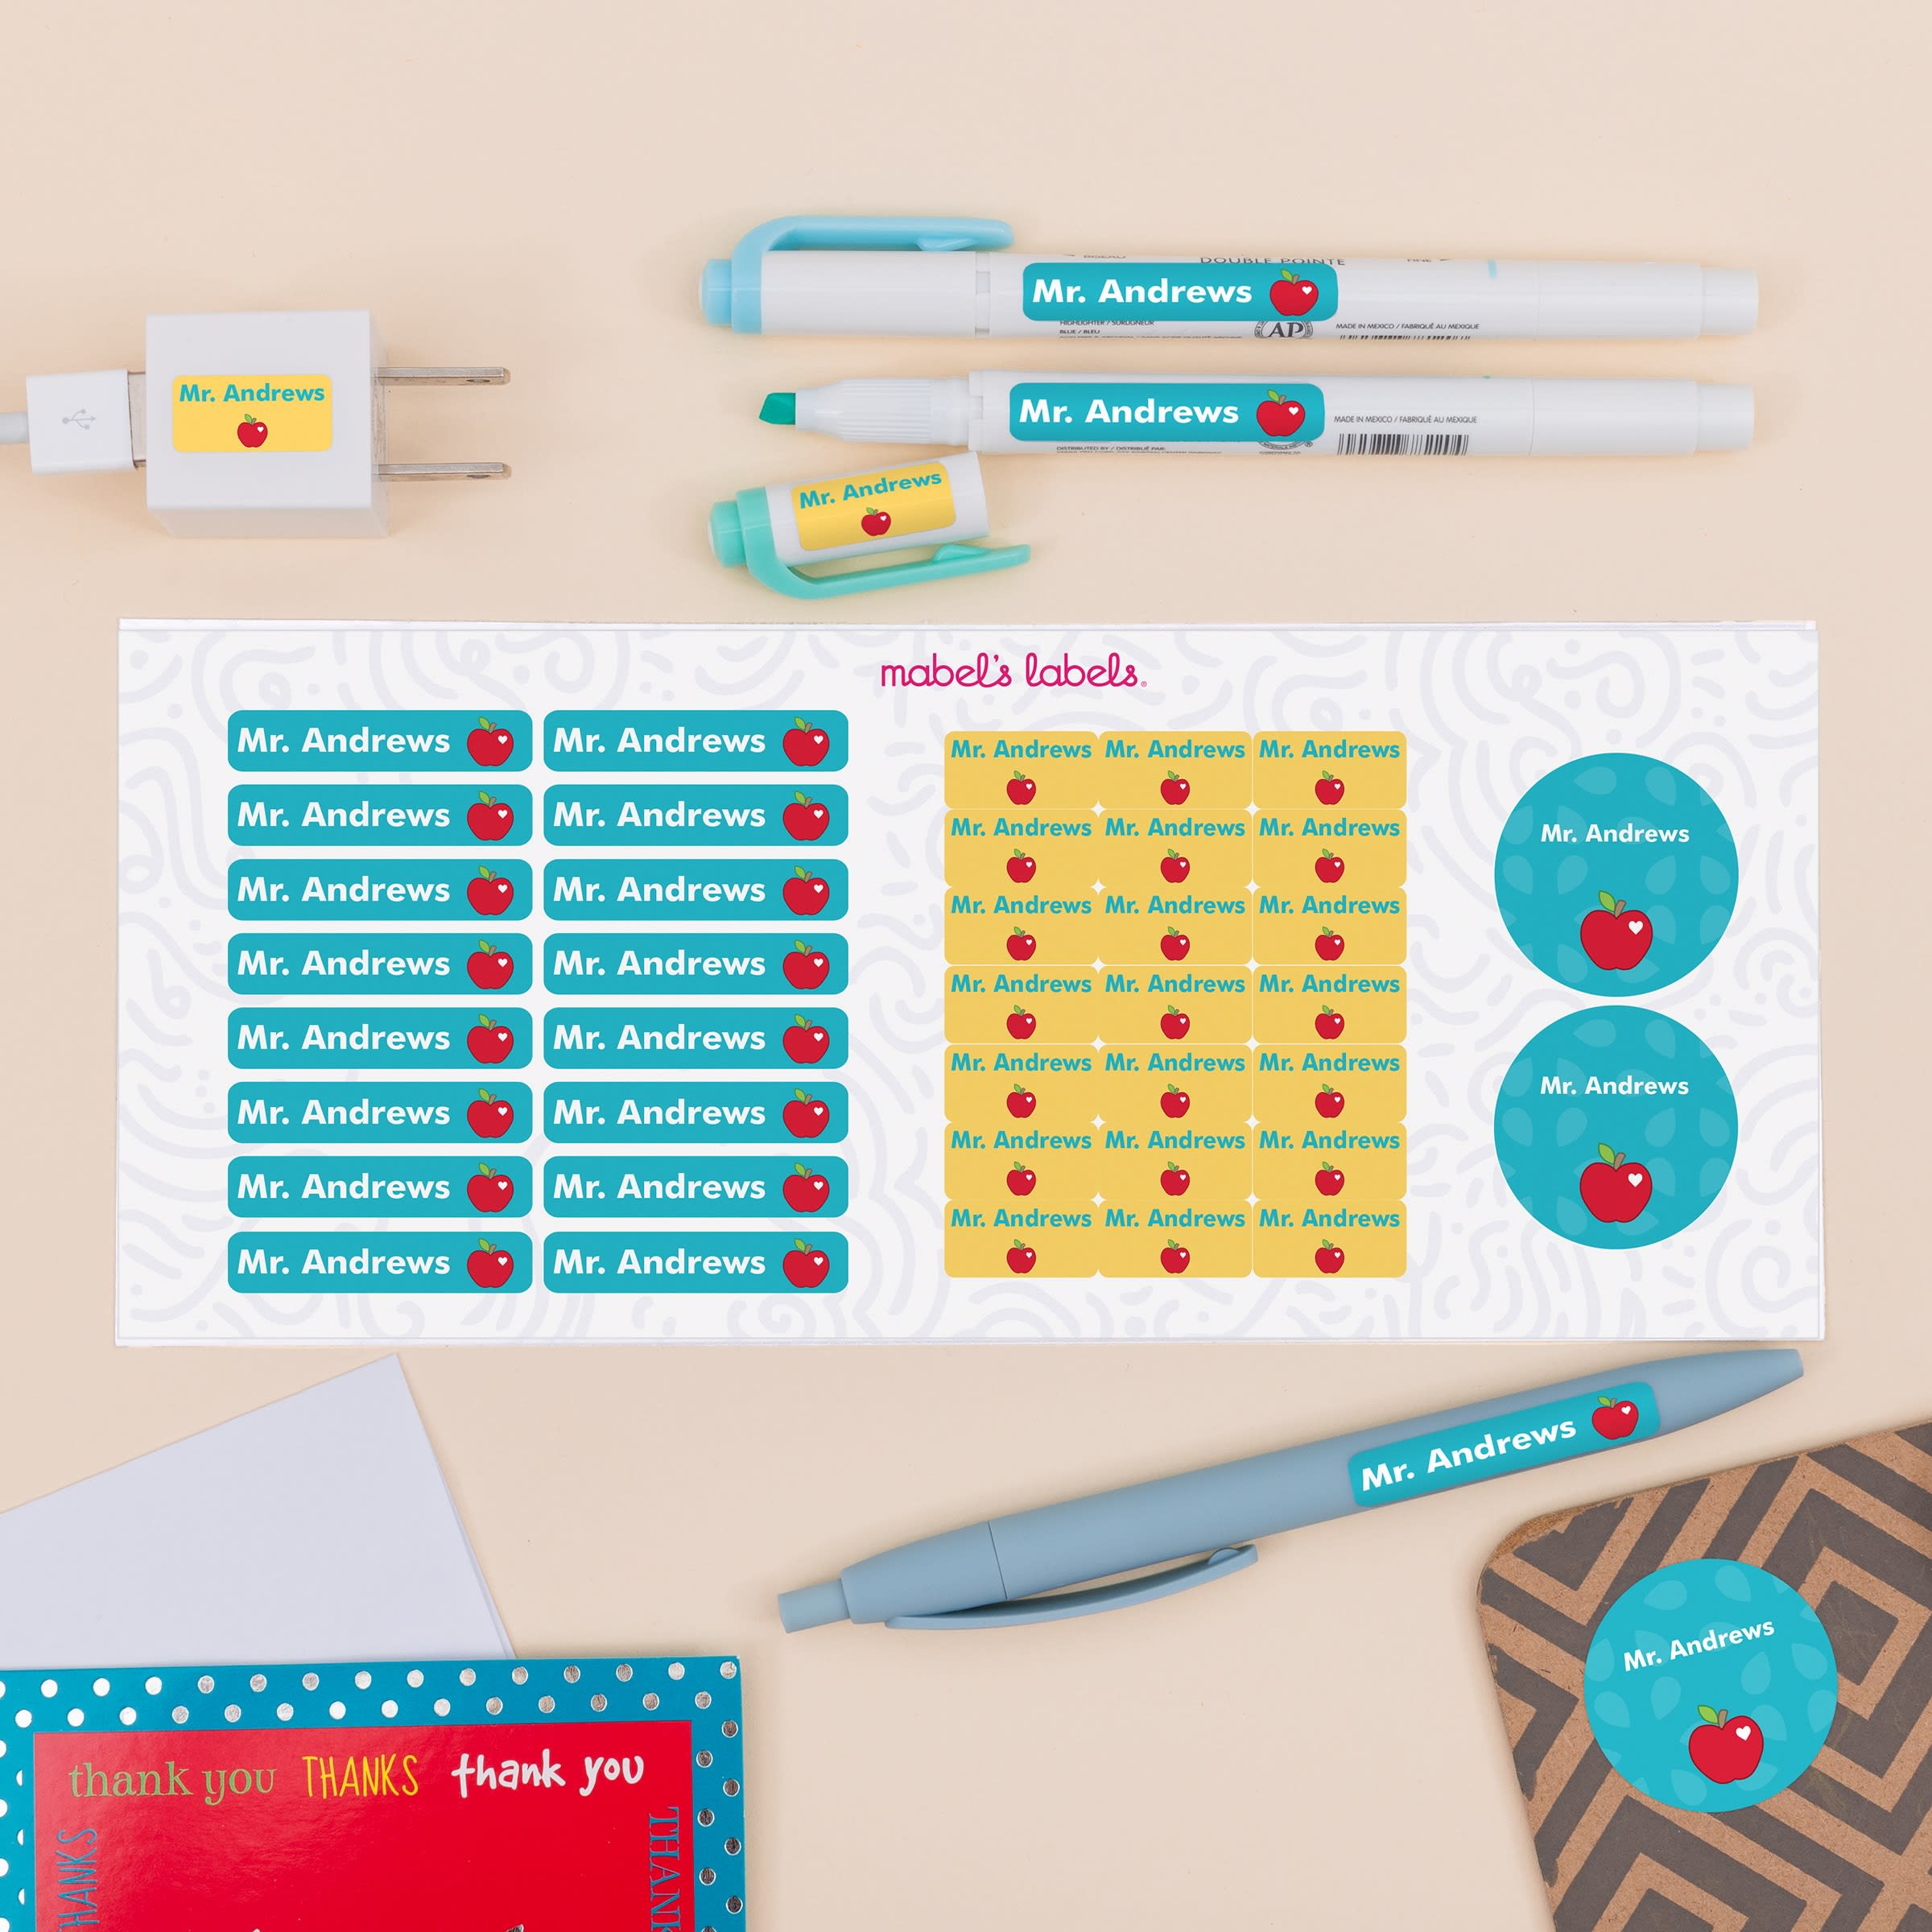 Mabel's Labels: Personalized Bag Tags & Backpack Tags